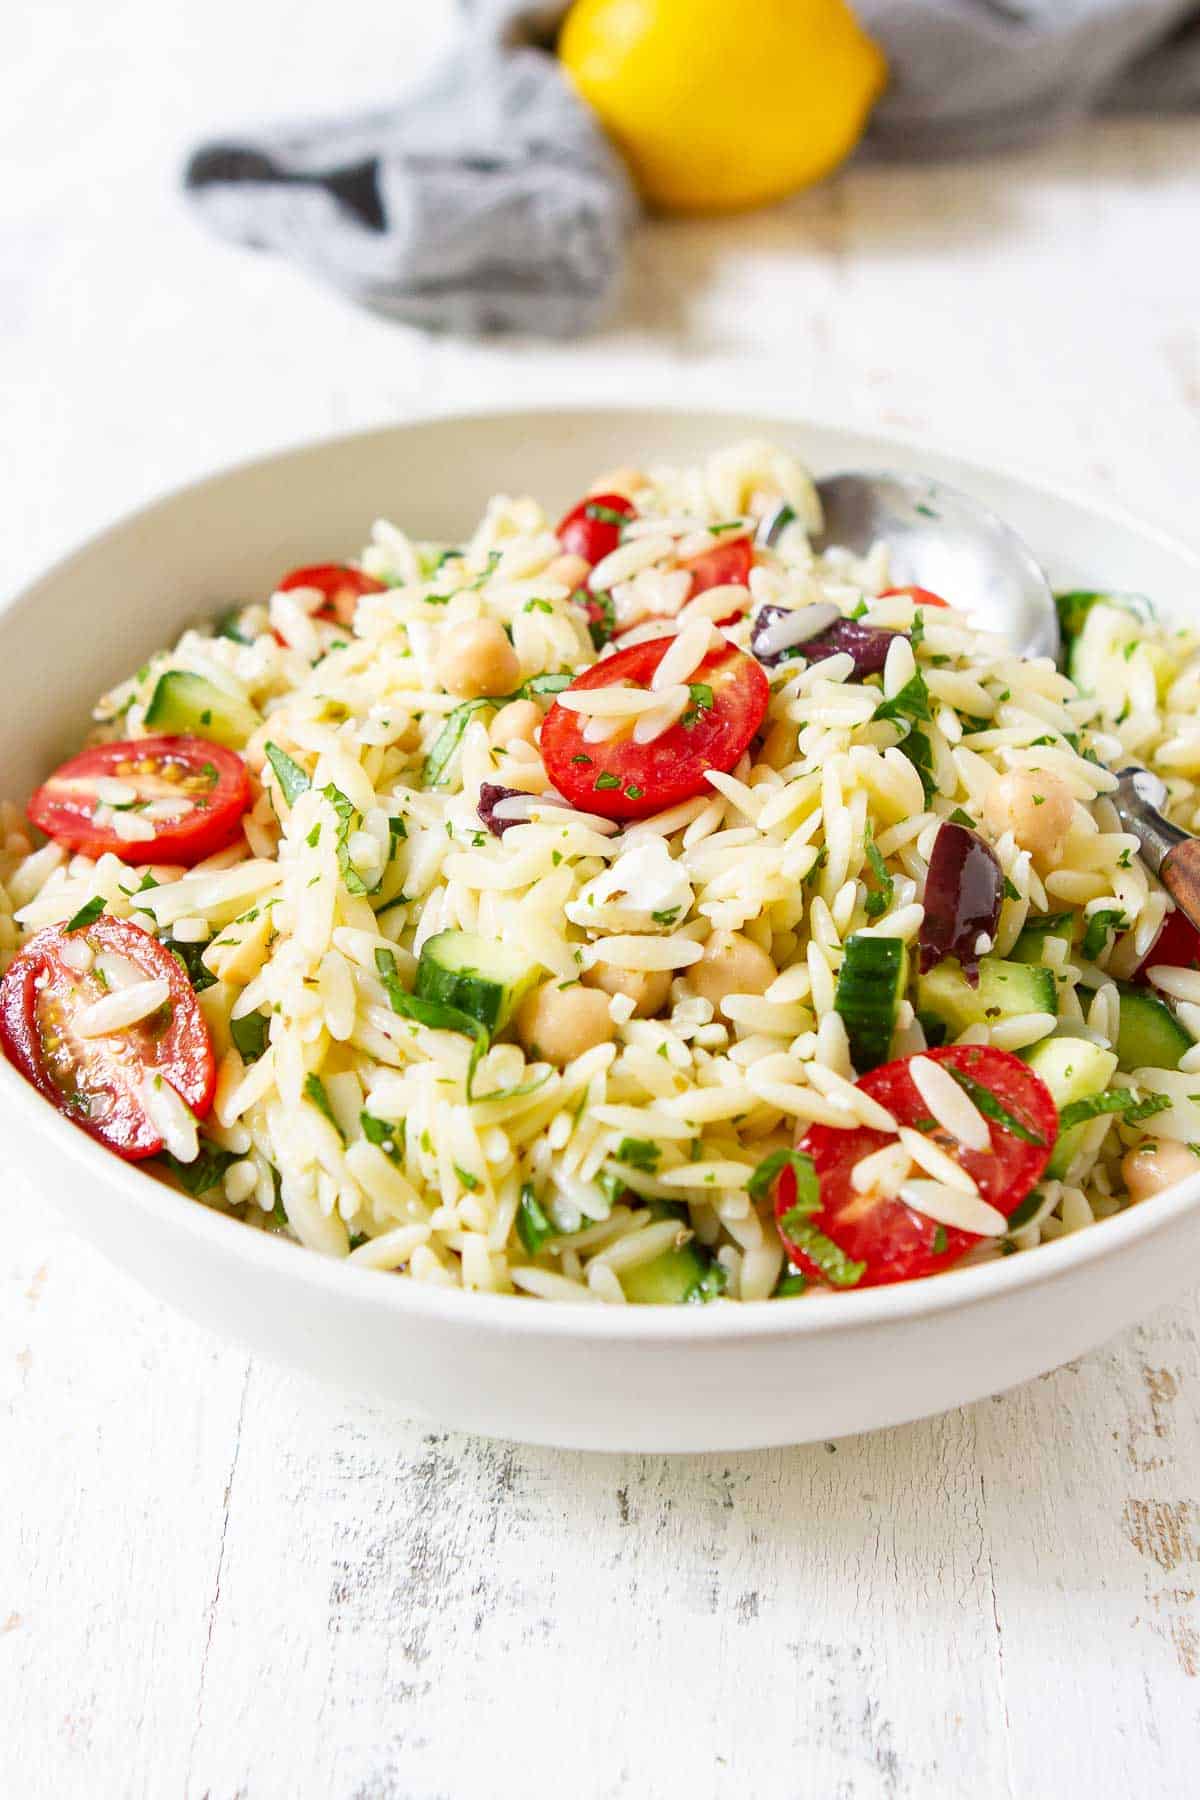 Pasta salad with chickpeas and tomatoes in a white bowl.